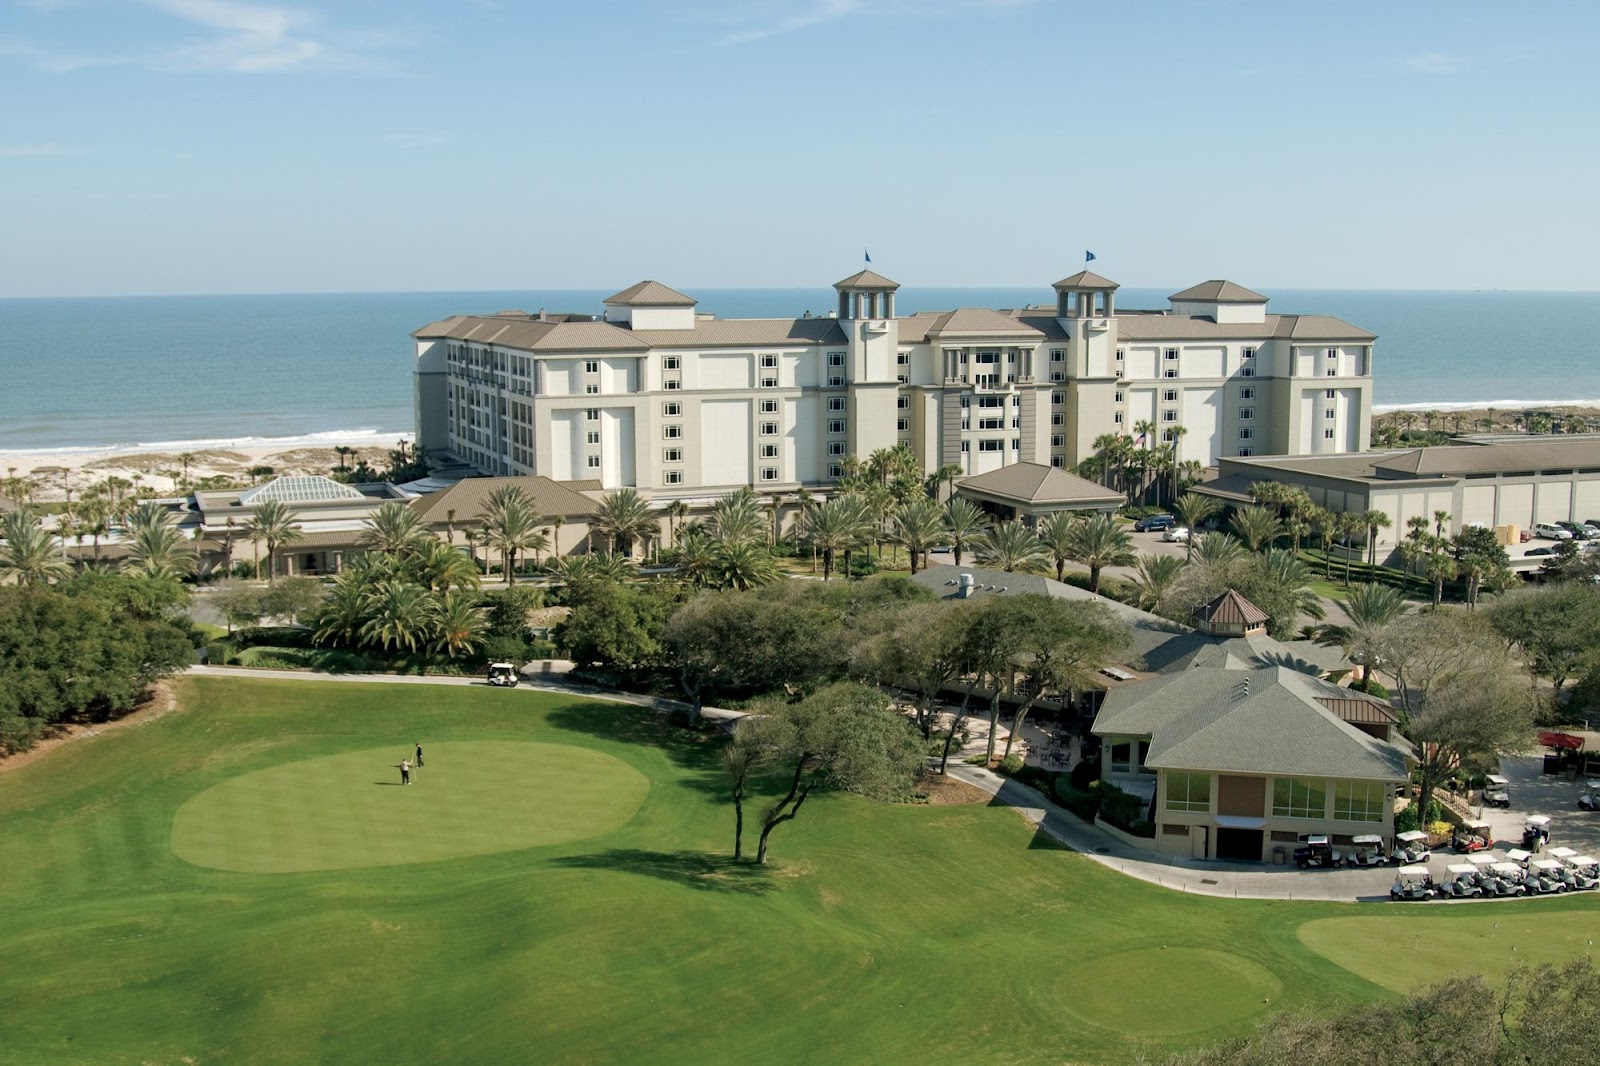 The Most Unique Luxury Golf Resorts in Florida